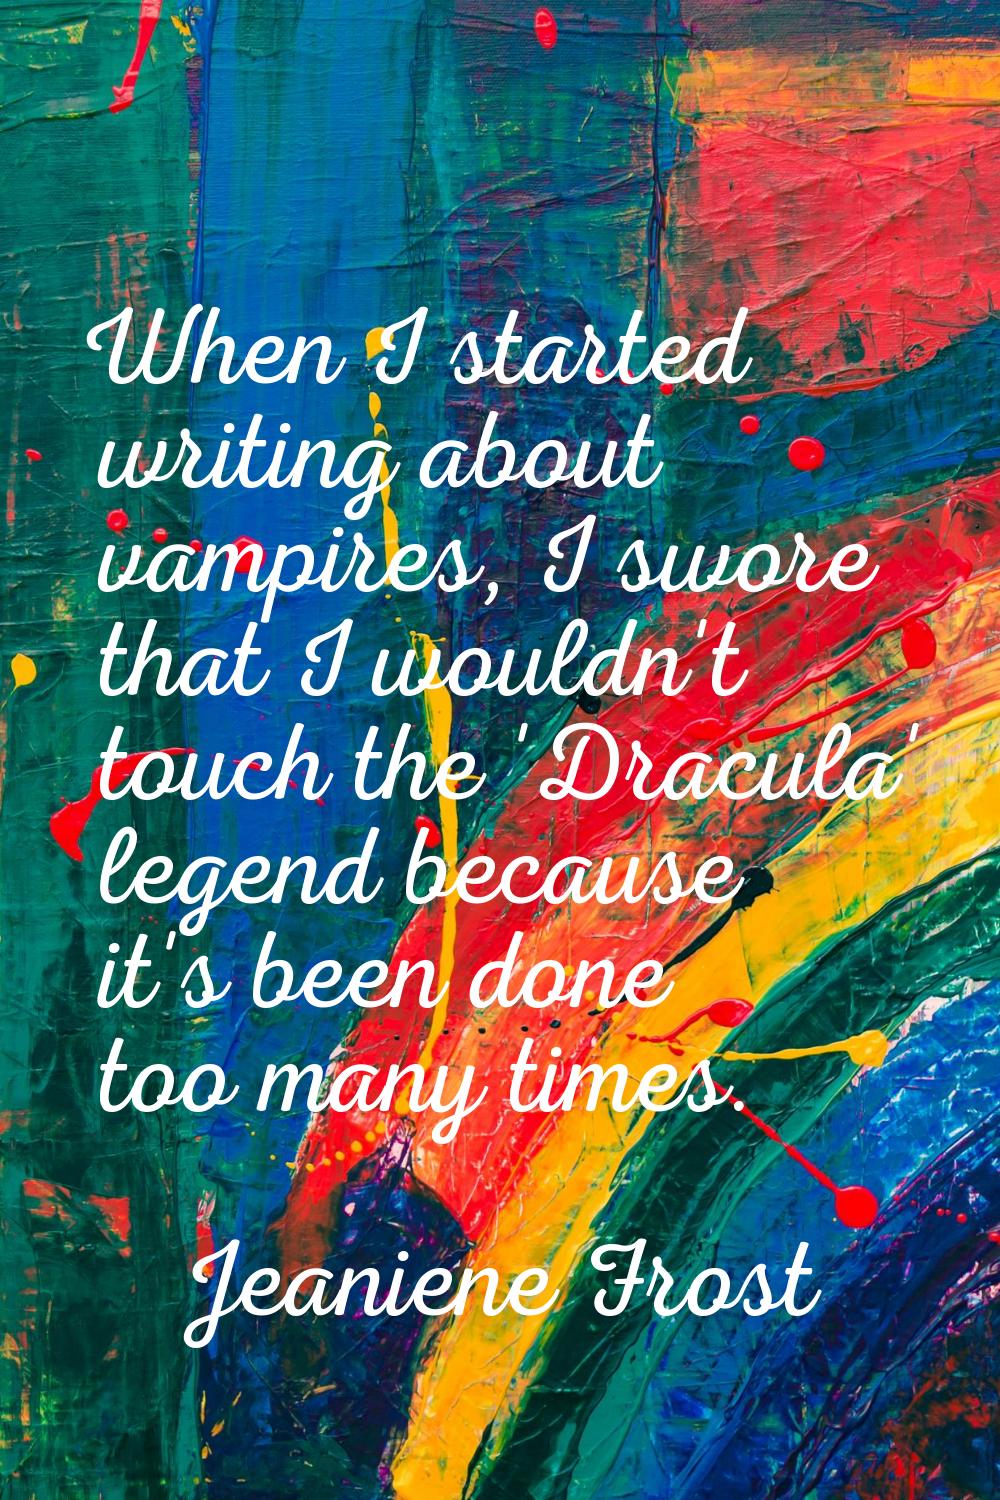 When I started writing about vampires, I swore that I wouldn't touch the 'Dracula' legend because i